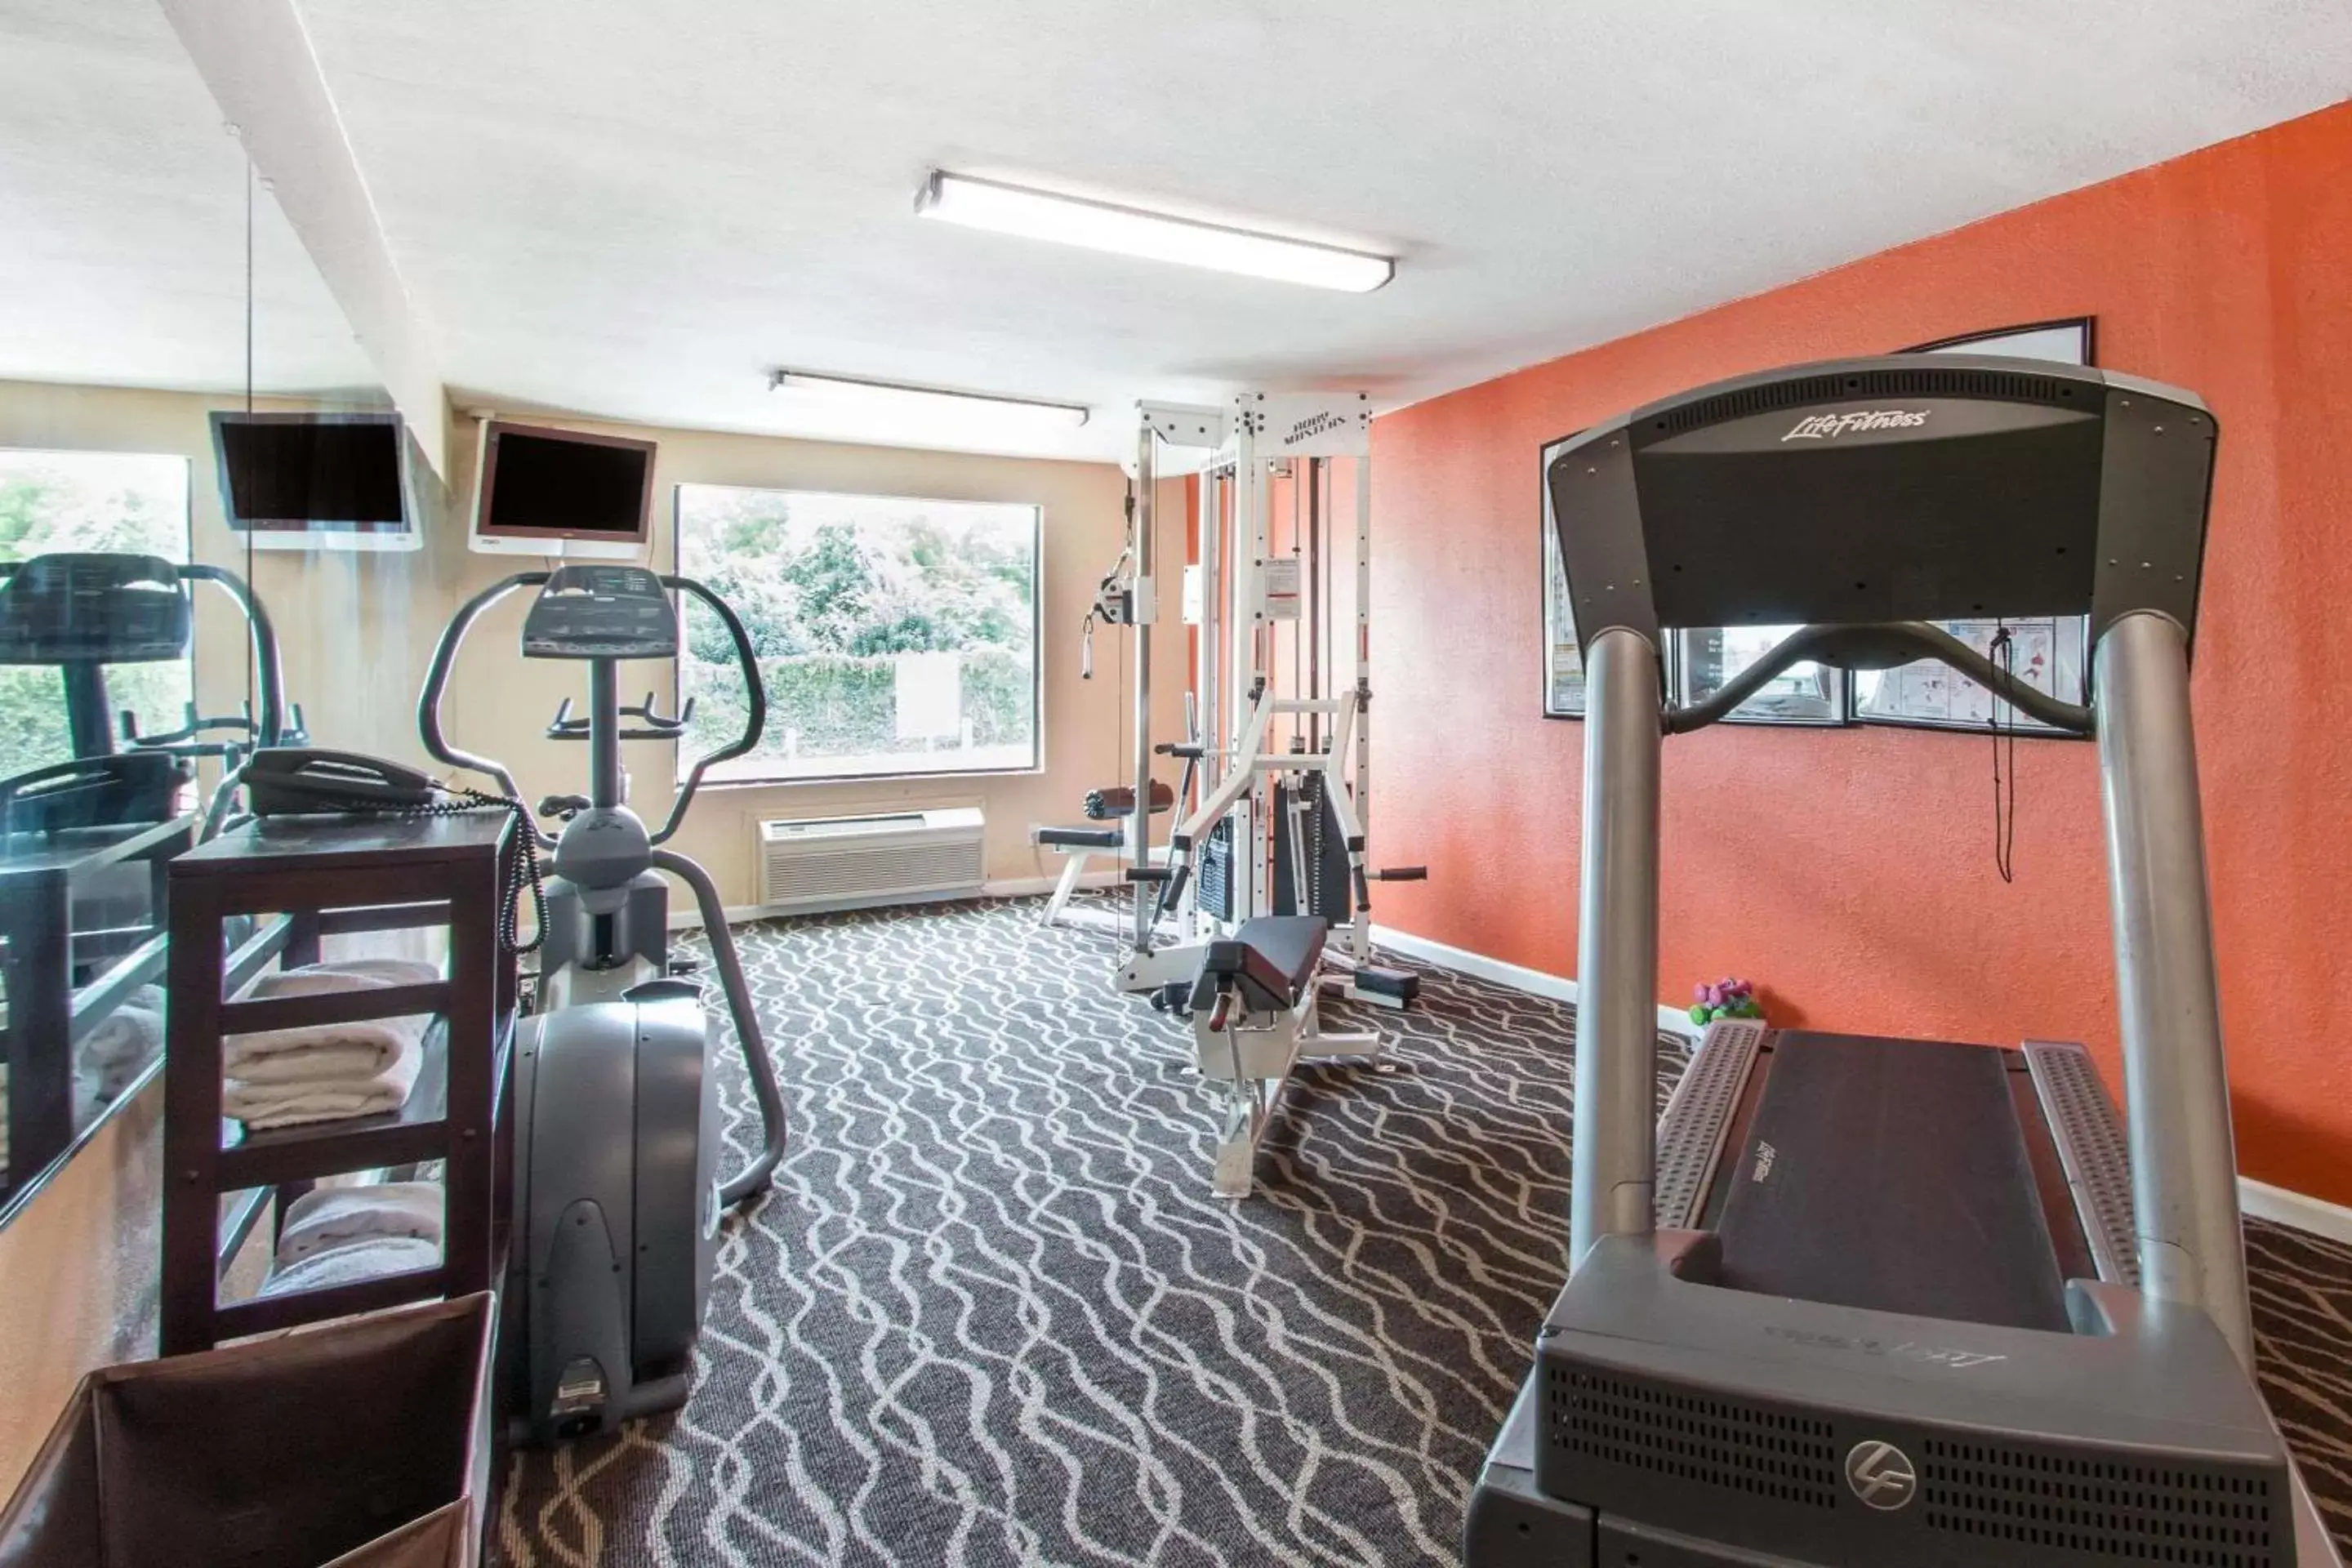 Fitness centre/facilities, Fitness Center/Facilities in Quality Inn & Suites I-35 near AT&T Center